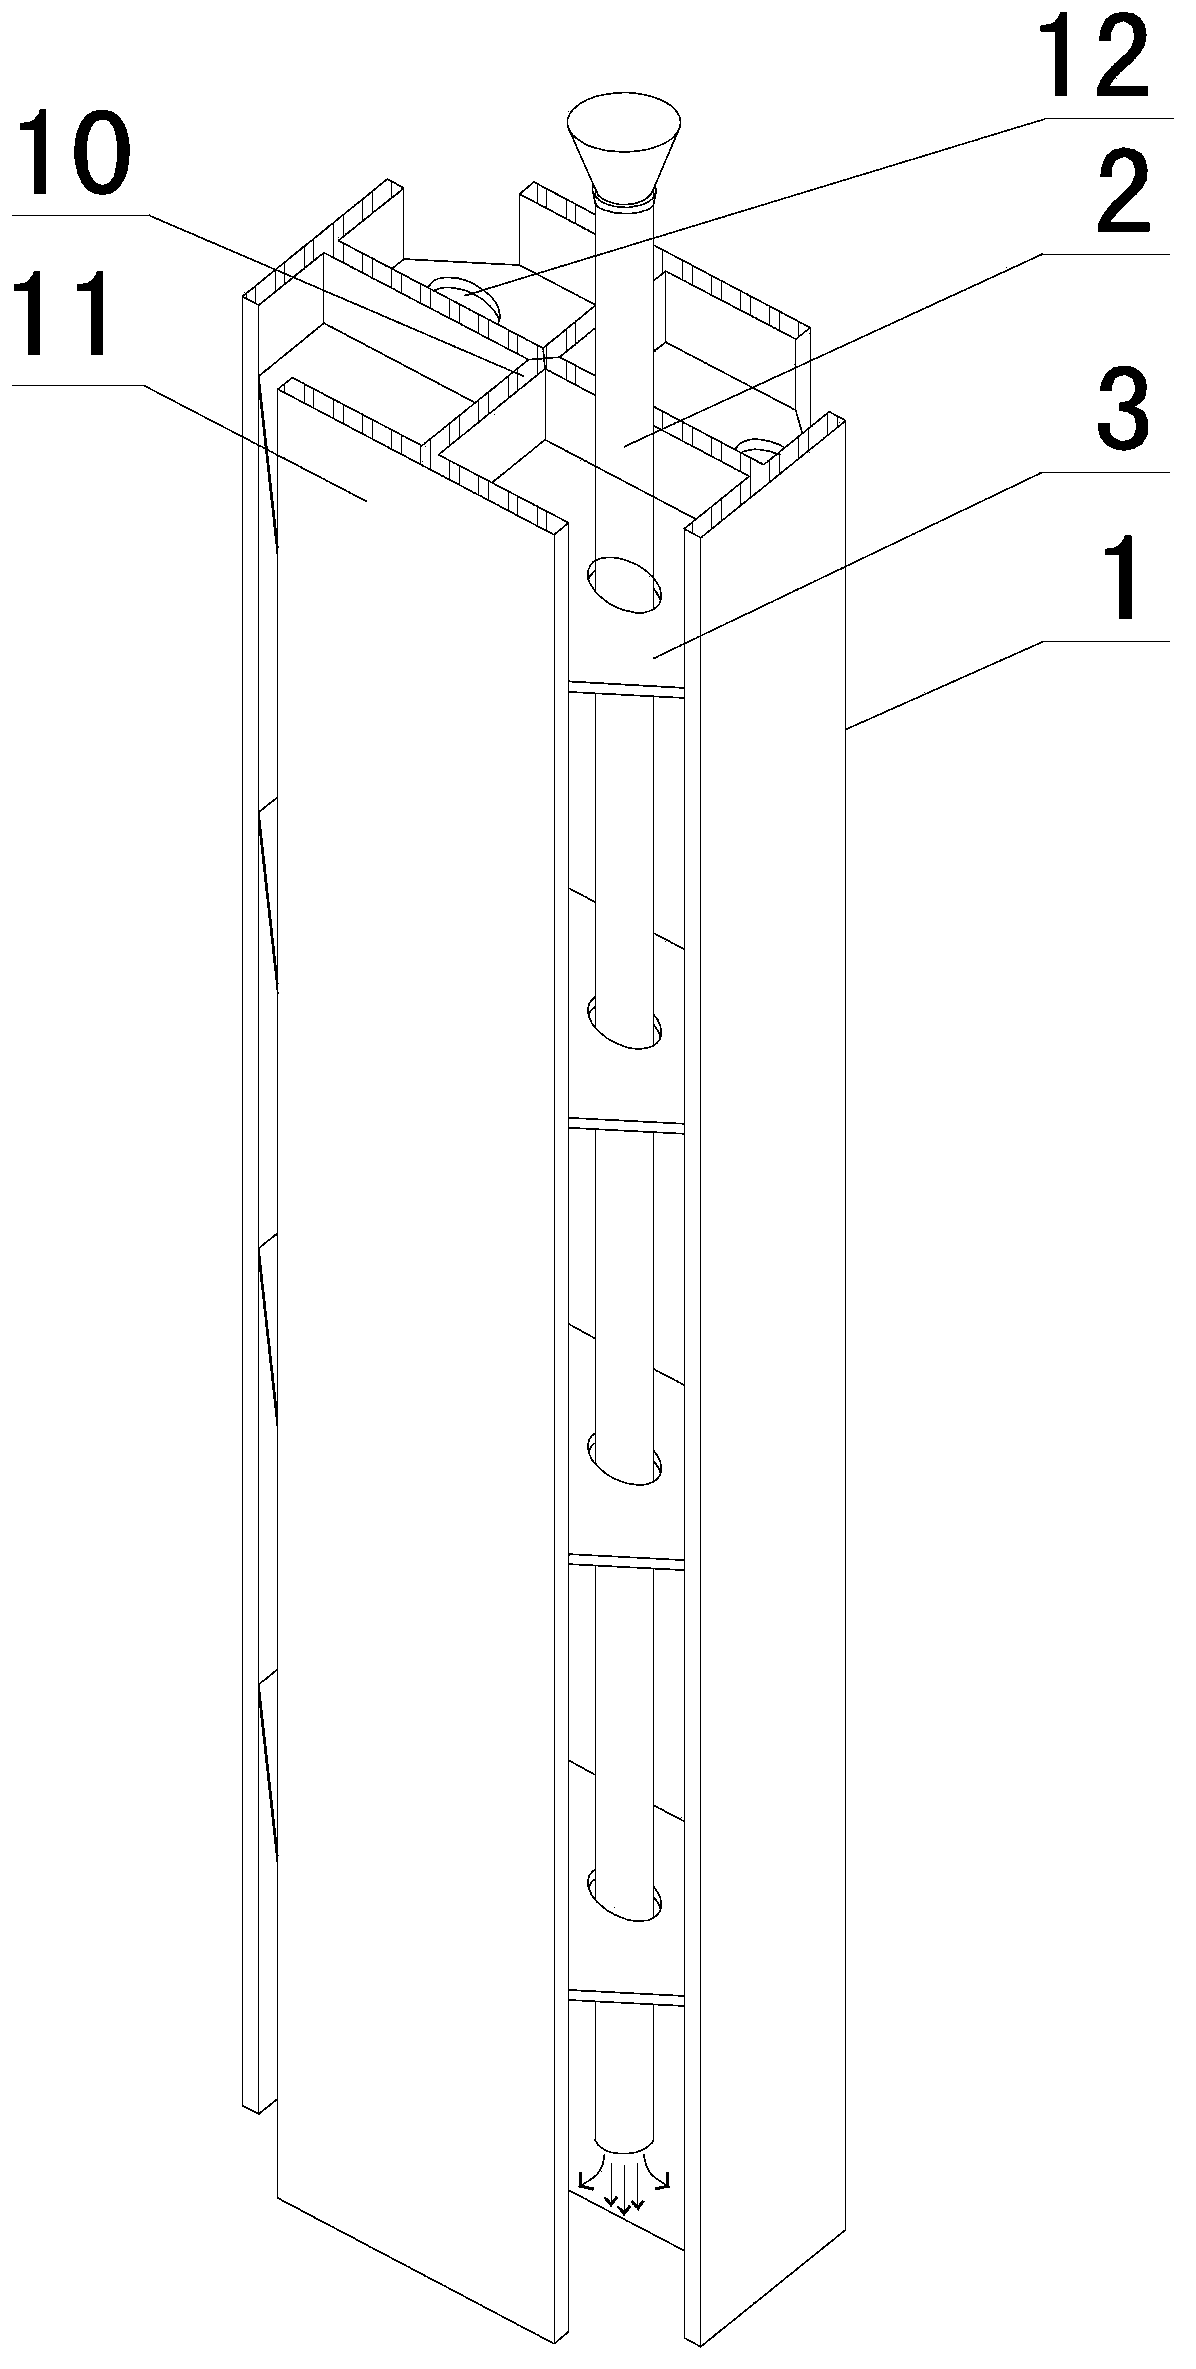 Concrete pouring method for combined structural steel and concrete structure of high-rise building